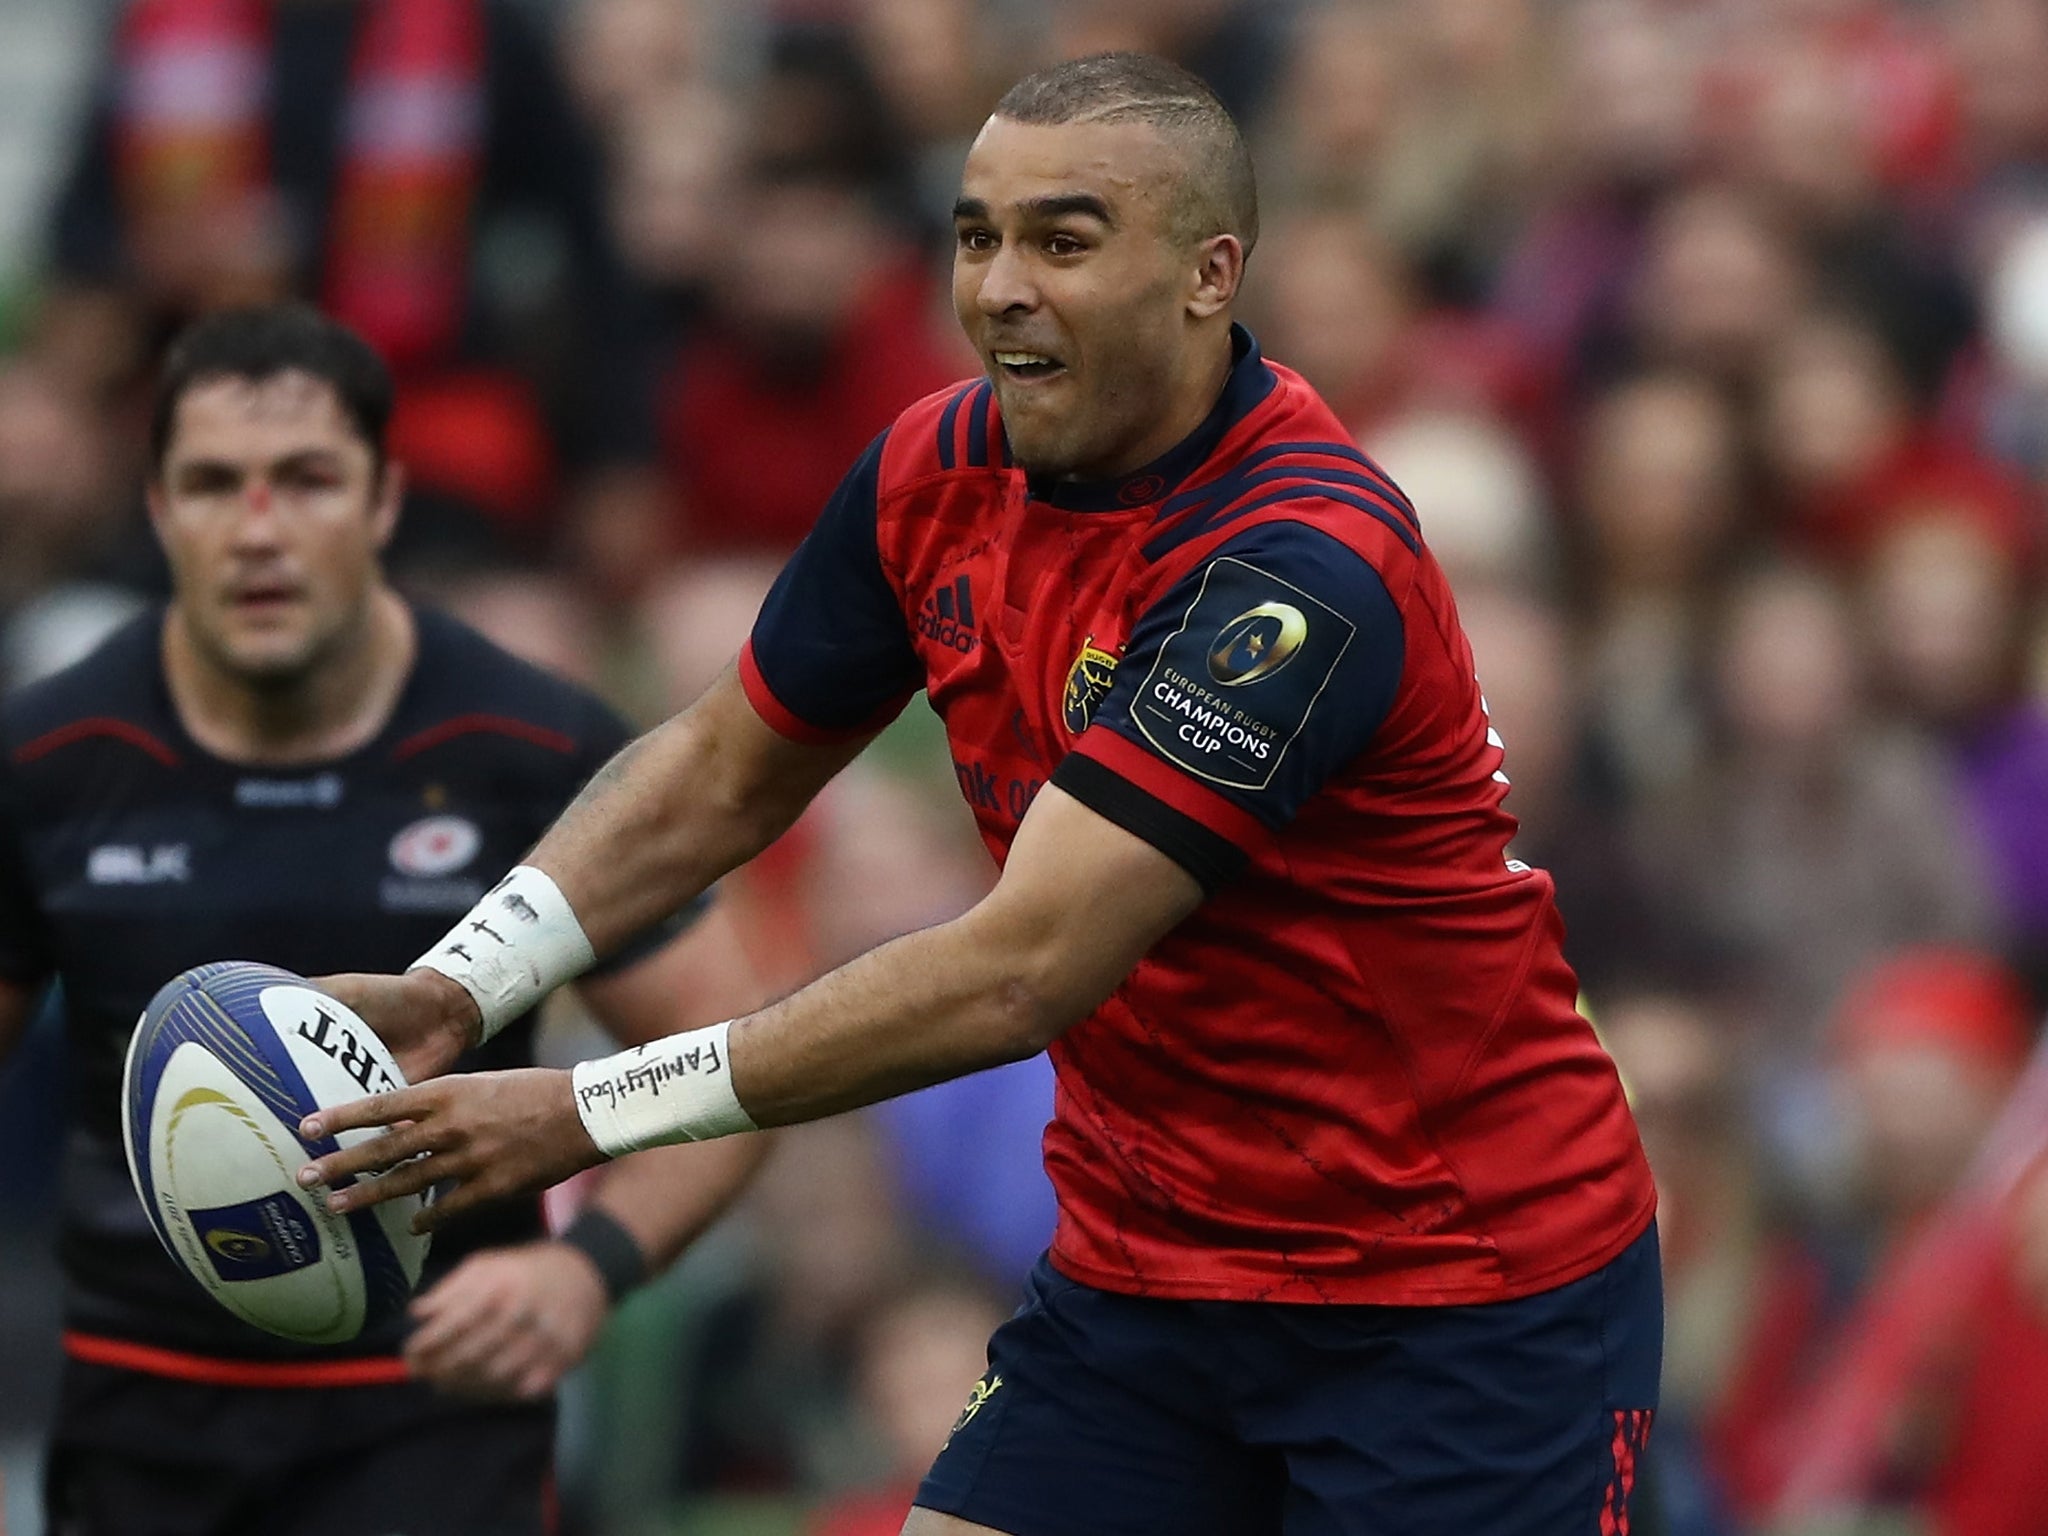 Simon Zebo will leave Munster at the end of the season